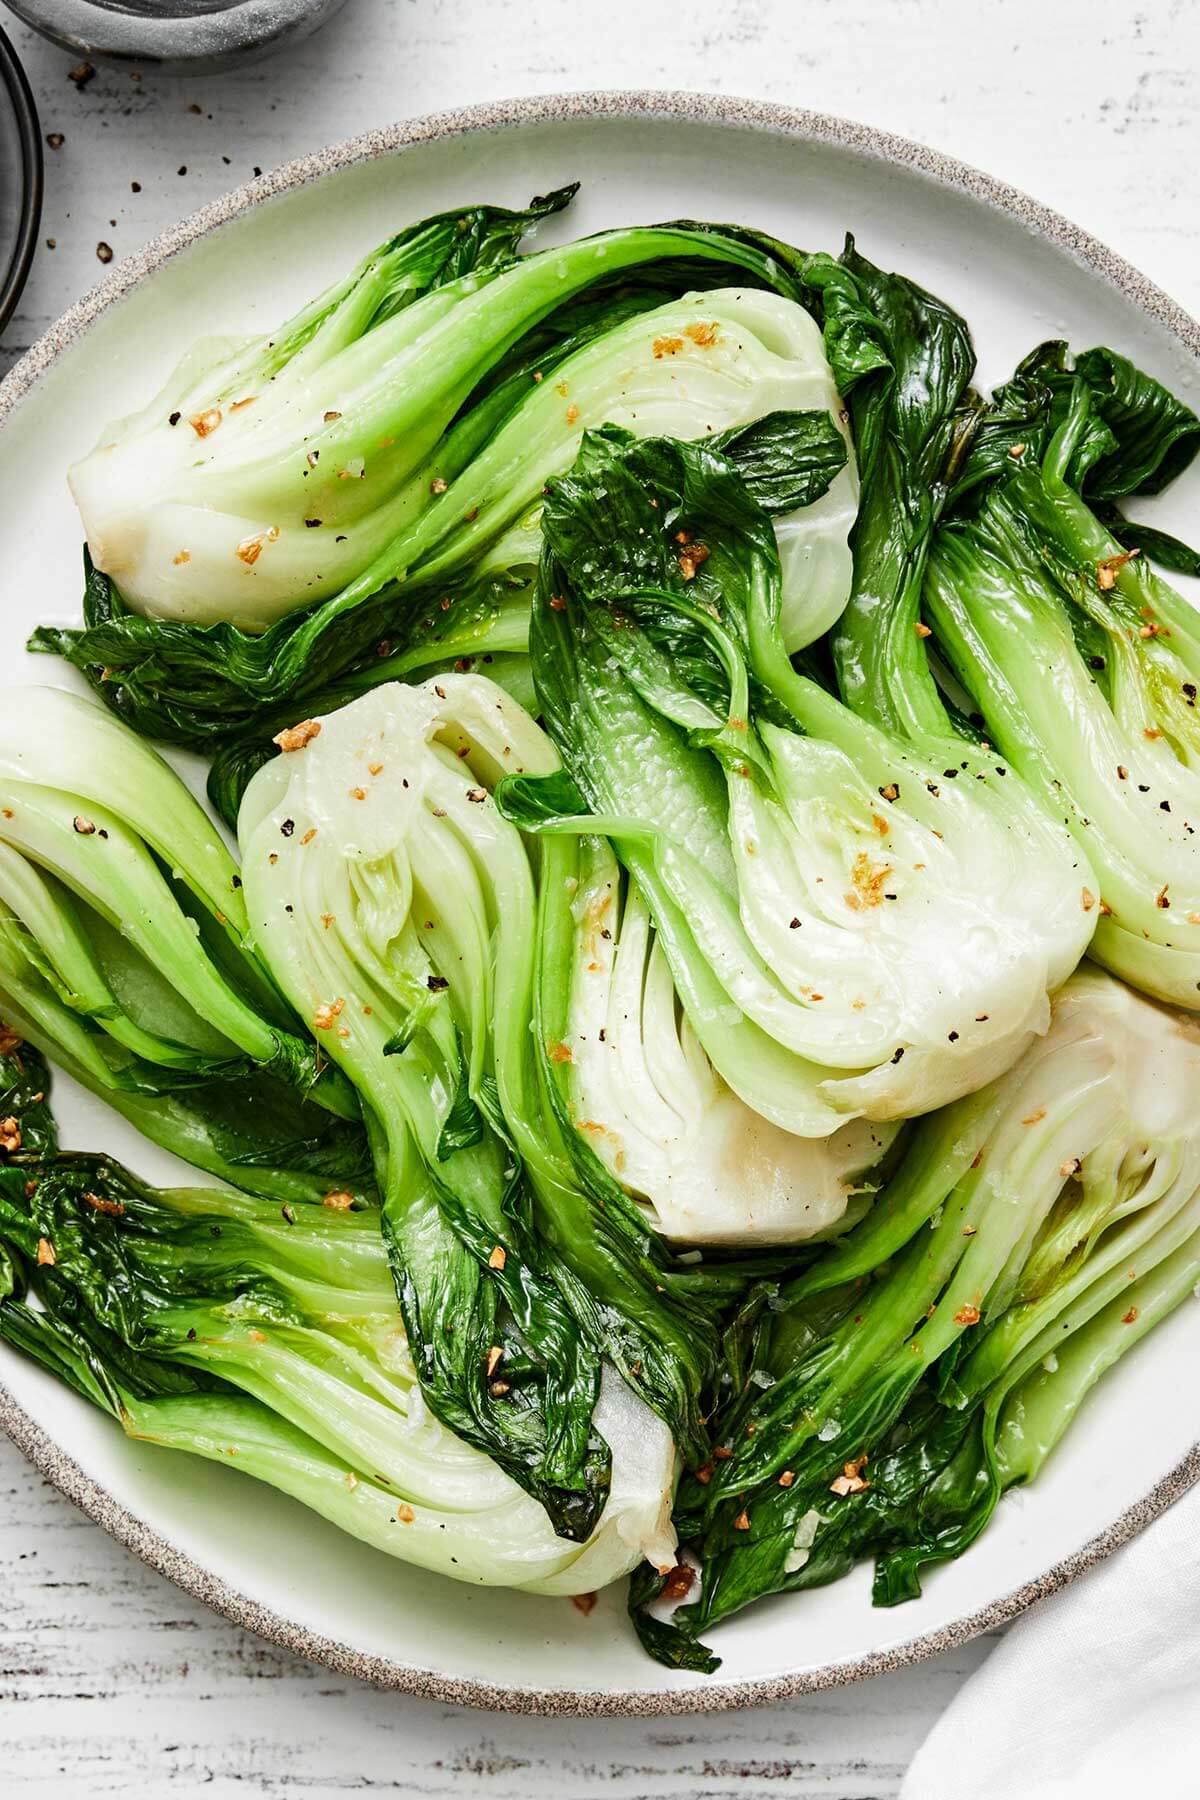 A plate of baby bok choy.